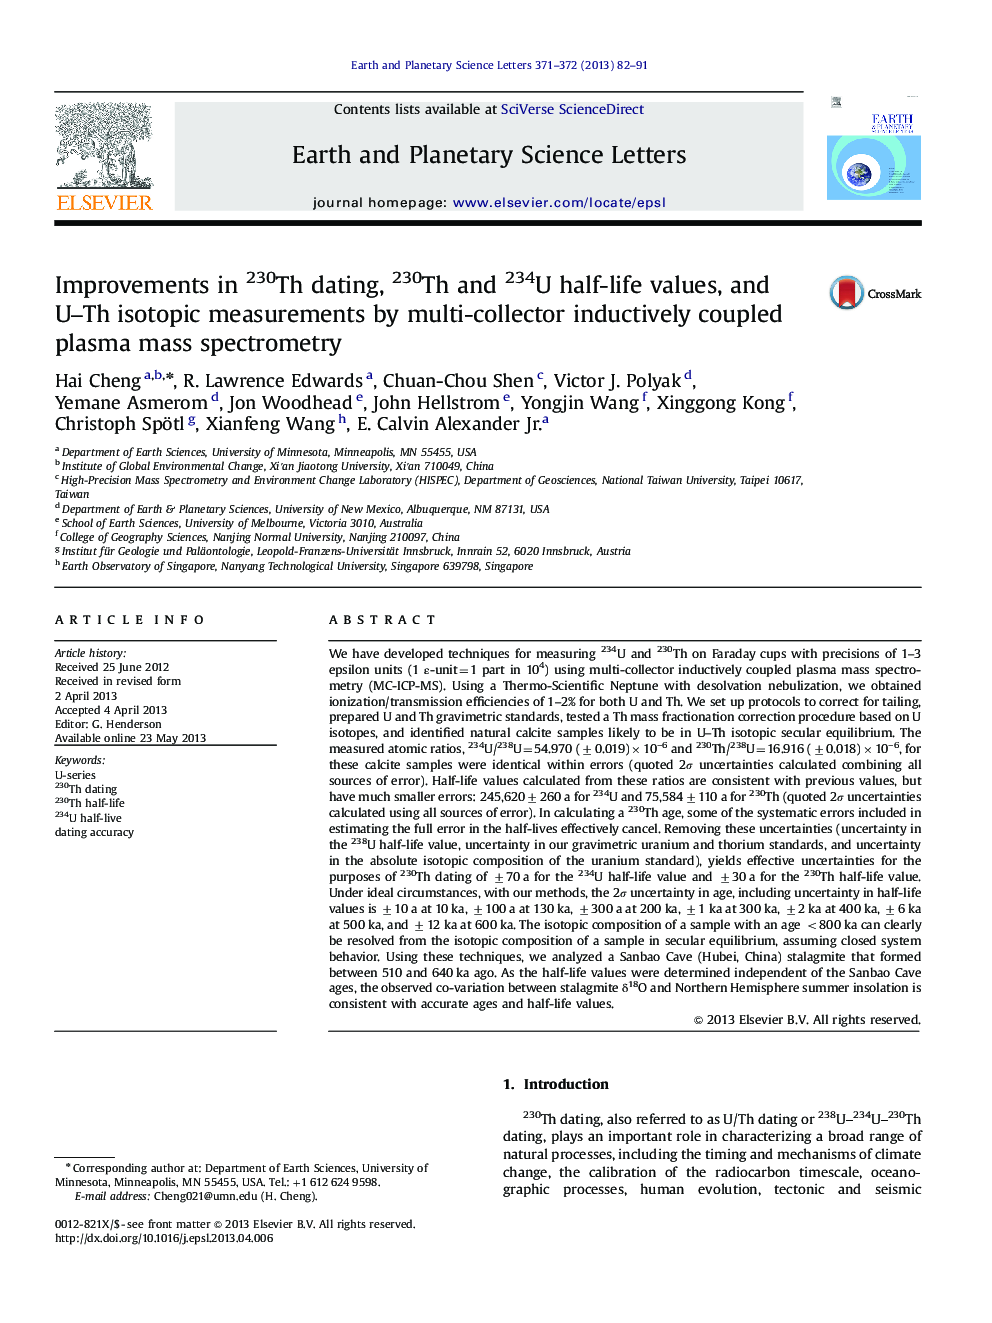 Improvements in 230Th dating, 230Th and 234U half-life values, and U–Th isotopic measurements by multi-collector inductively coupled plasma mass spectrometry